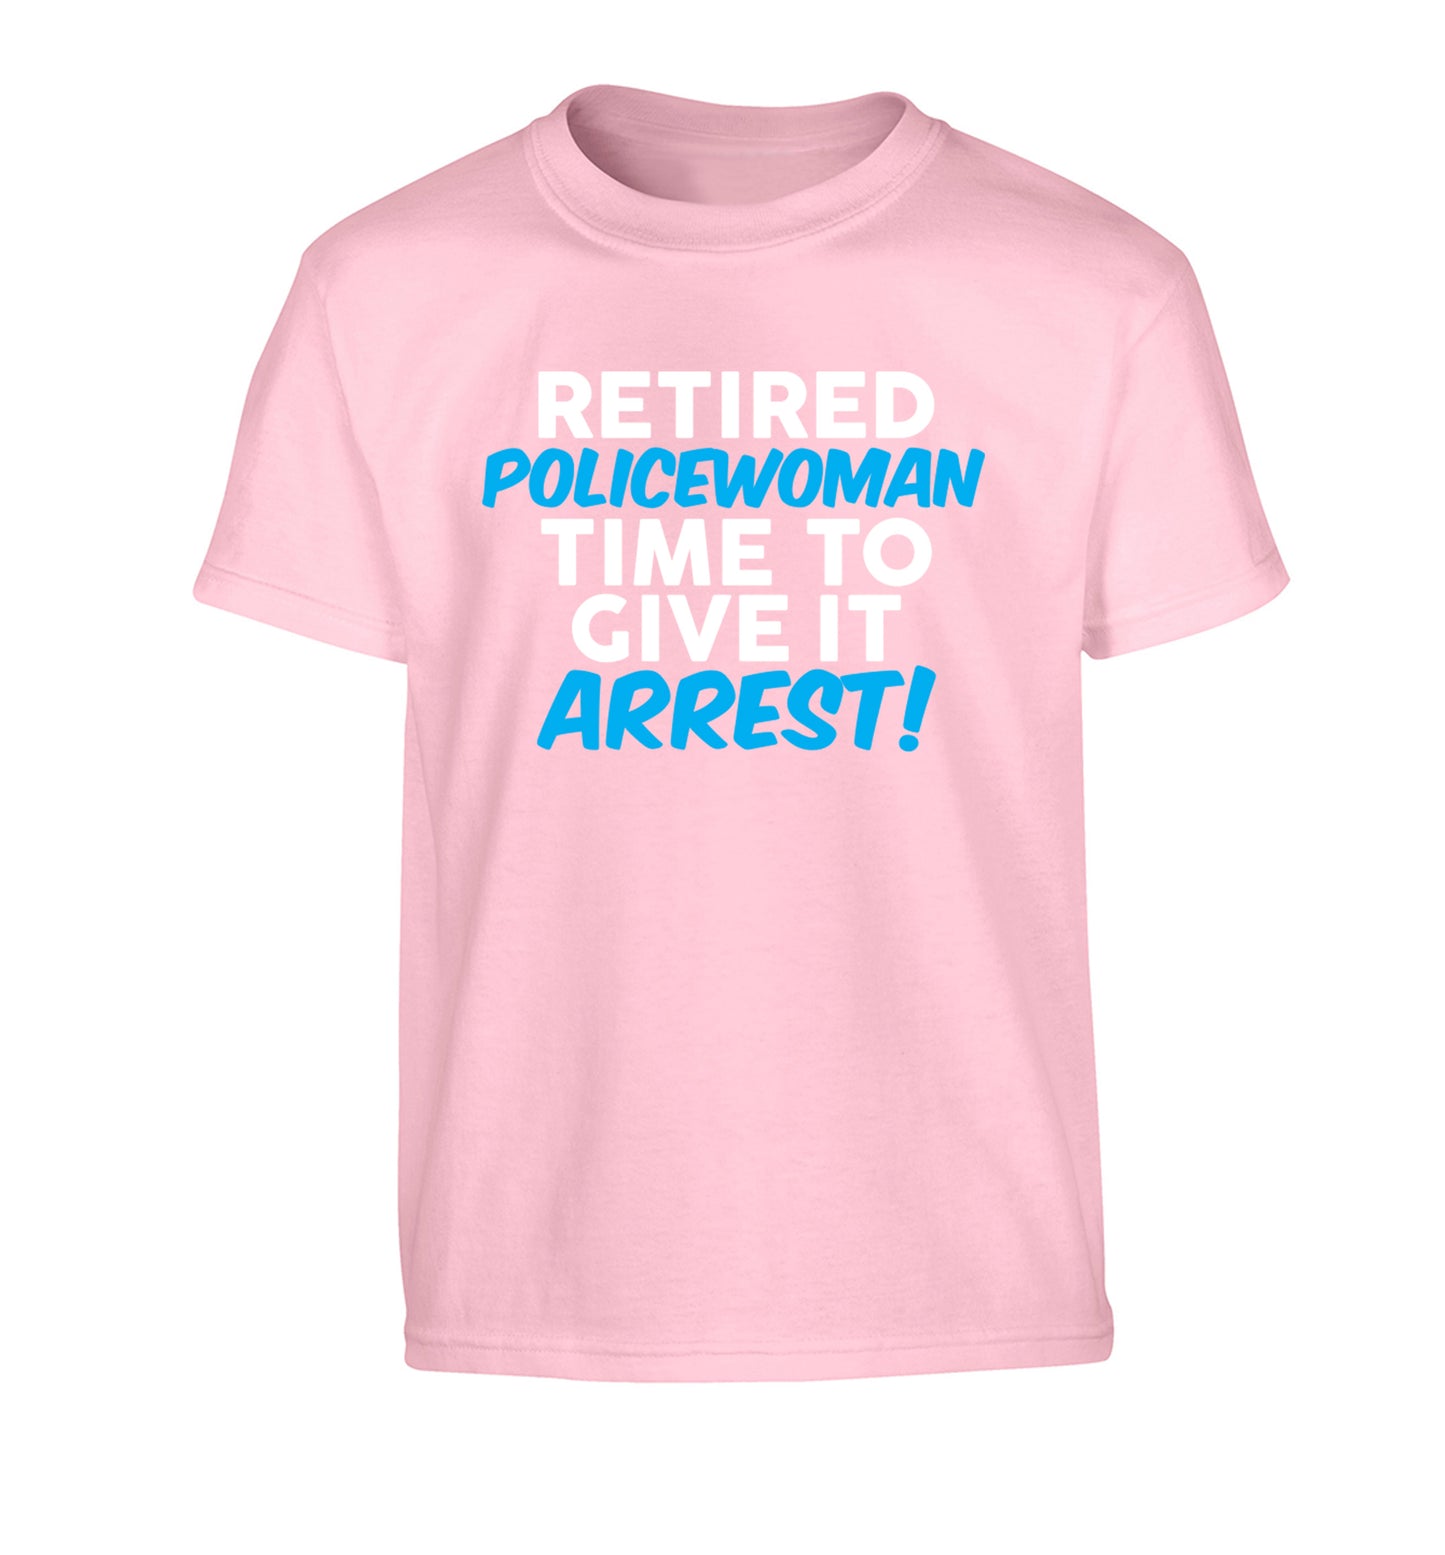 Retired policewoman time to give it arrest Children's light pink Tshirt 12-13 Years